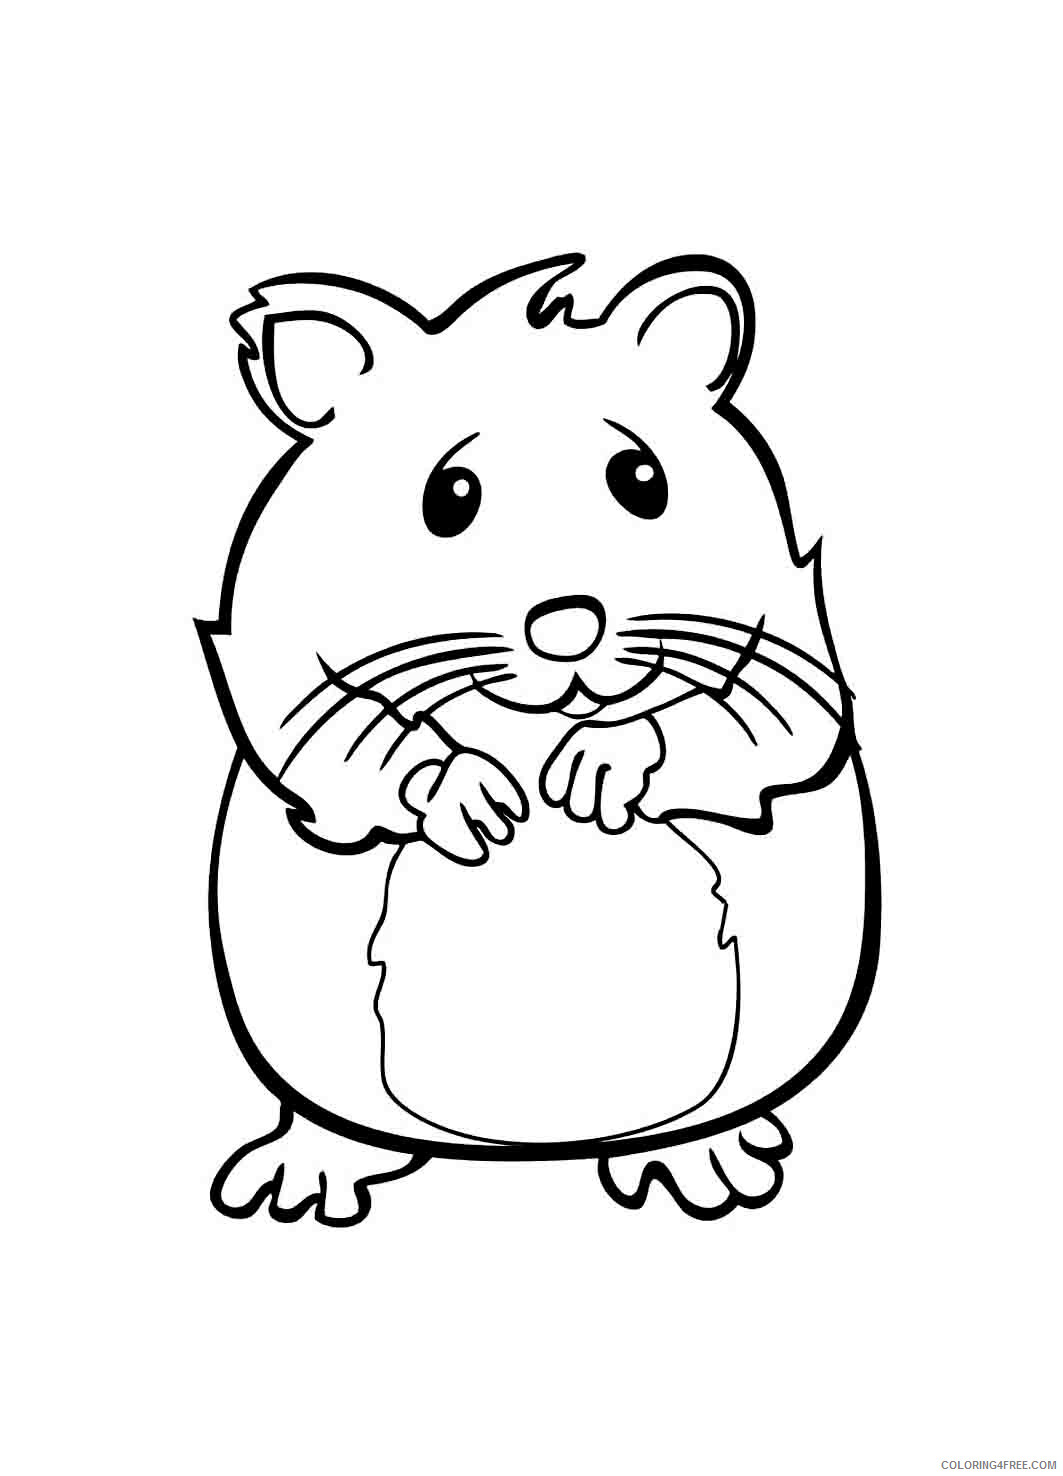 Hamster Coloring Pages Animal Printable Sheets Cute Pet Hamster 2021 2564 Coloring4free